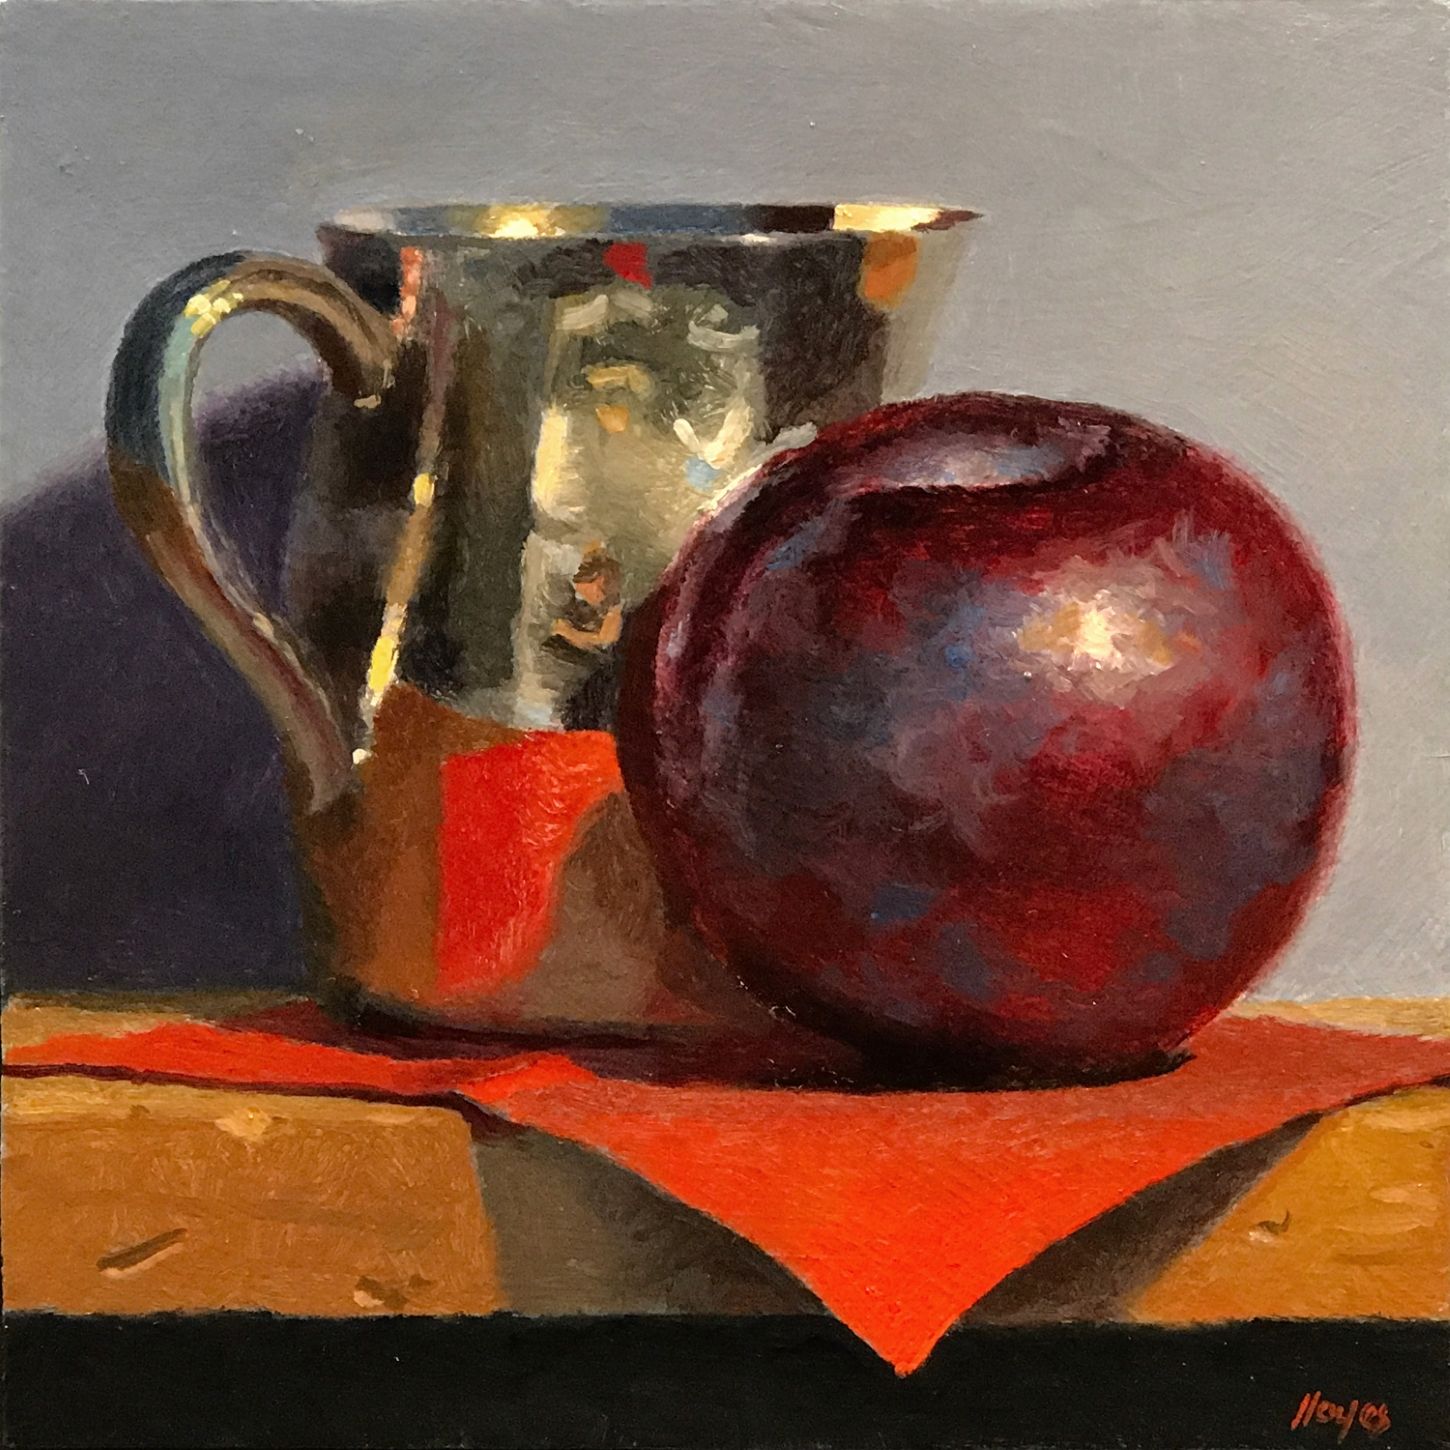 "Plum, Silver Creamer, Red Napkin" Oil on panel, 5x5 inches, 2021 (Prints are available)